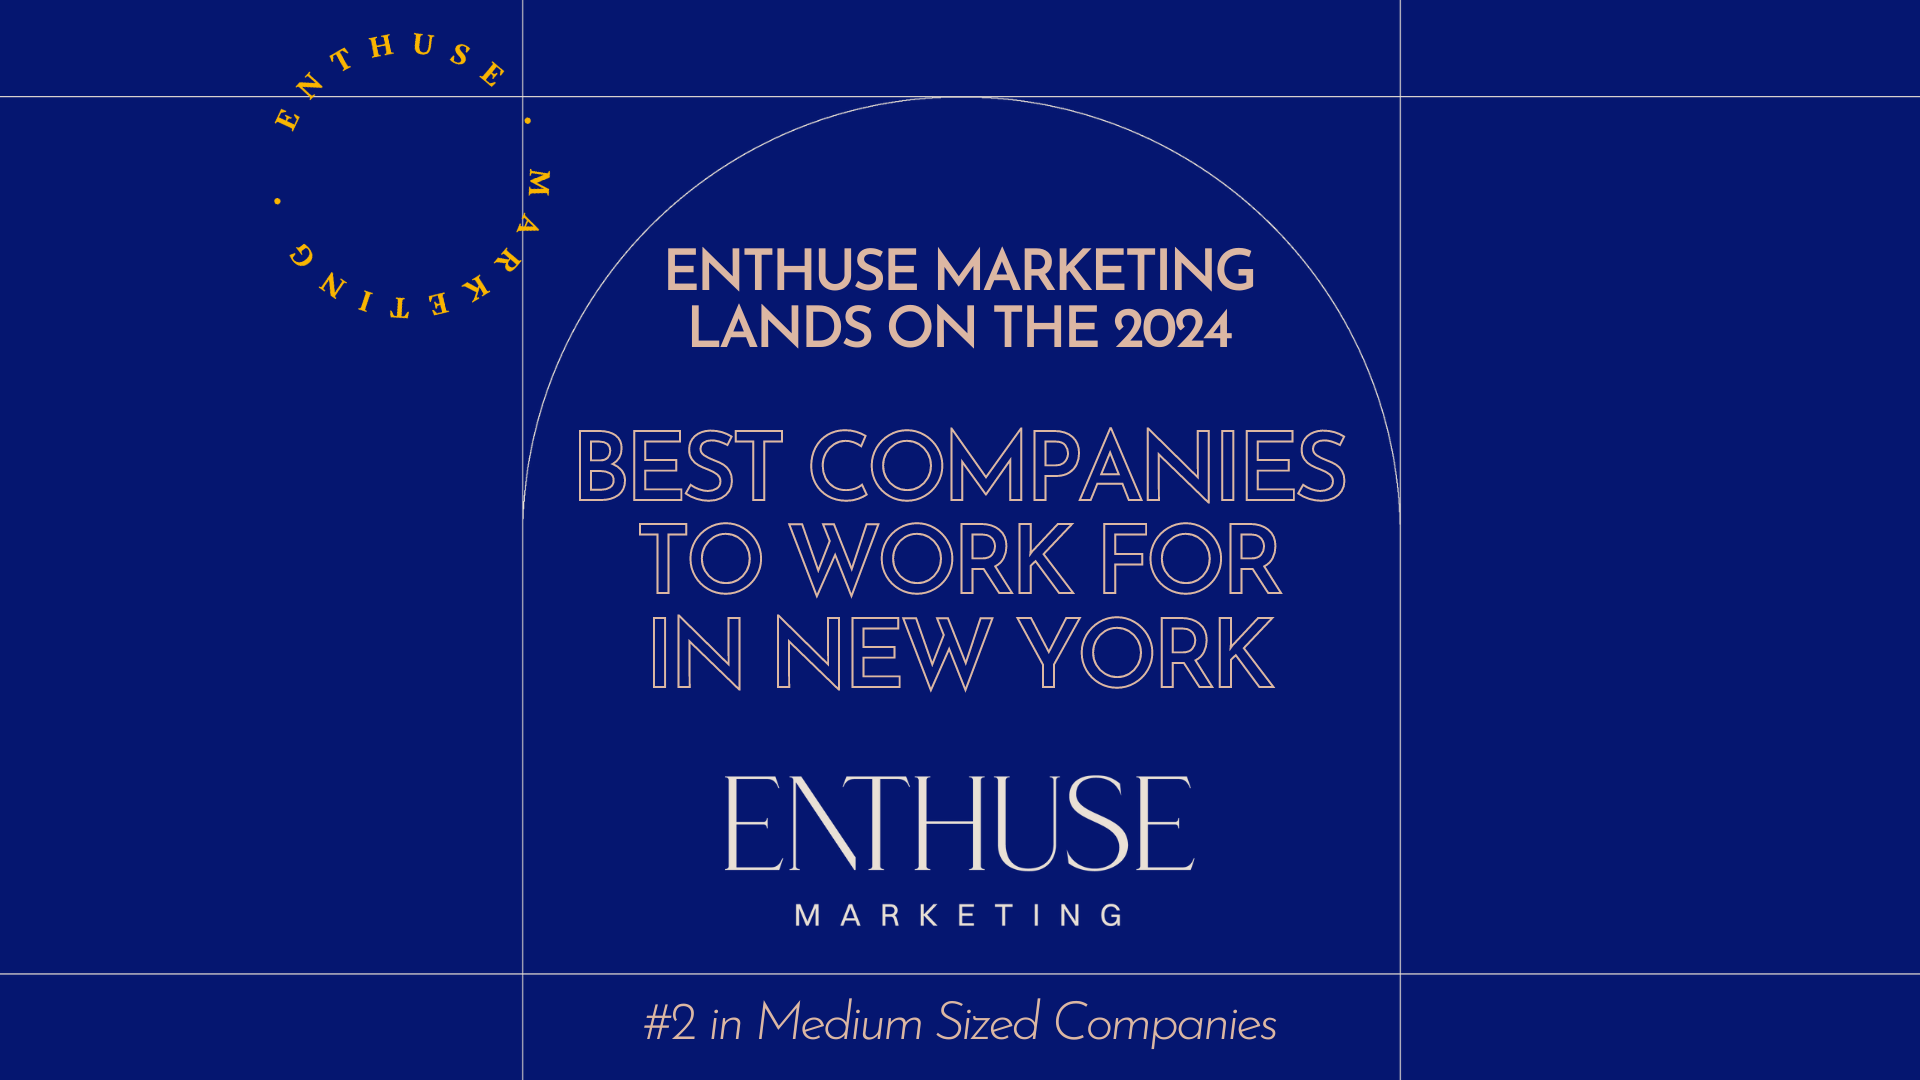 Enthuse Marketing Lands on the 2024 Best Companies to Work for in New York